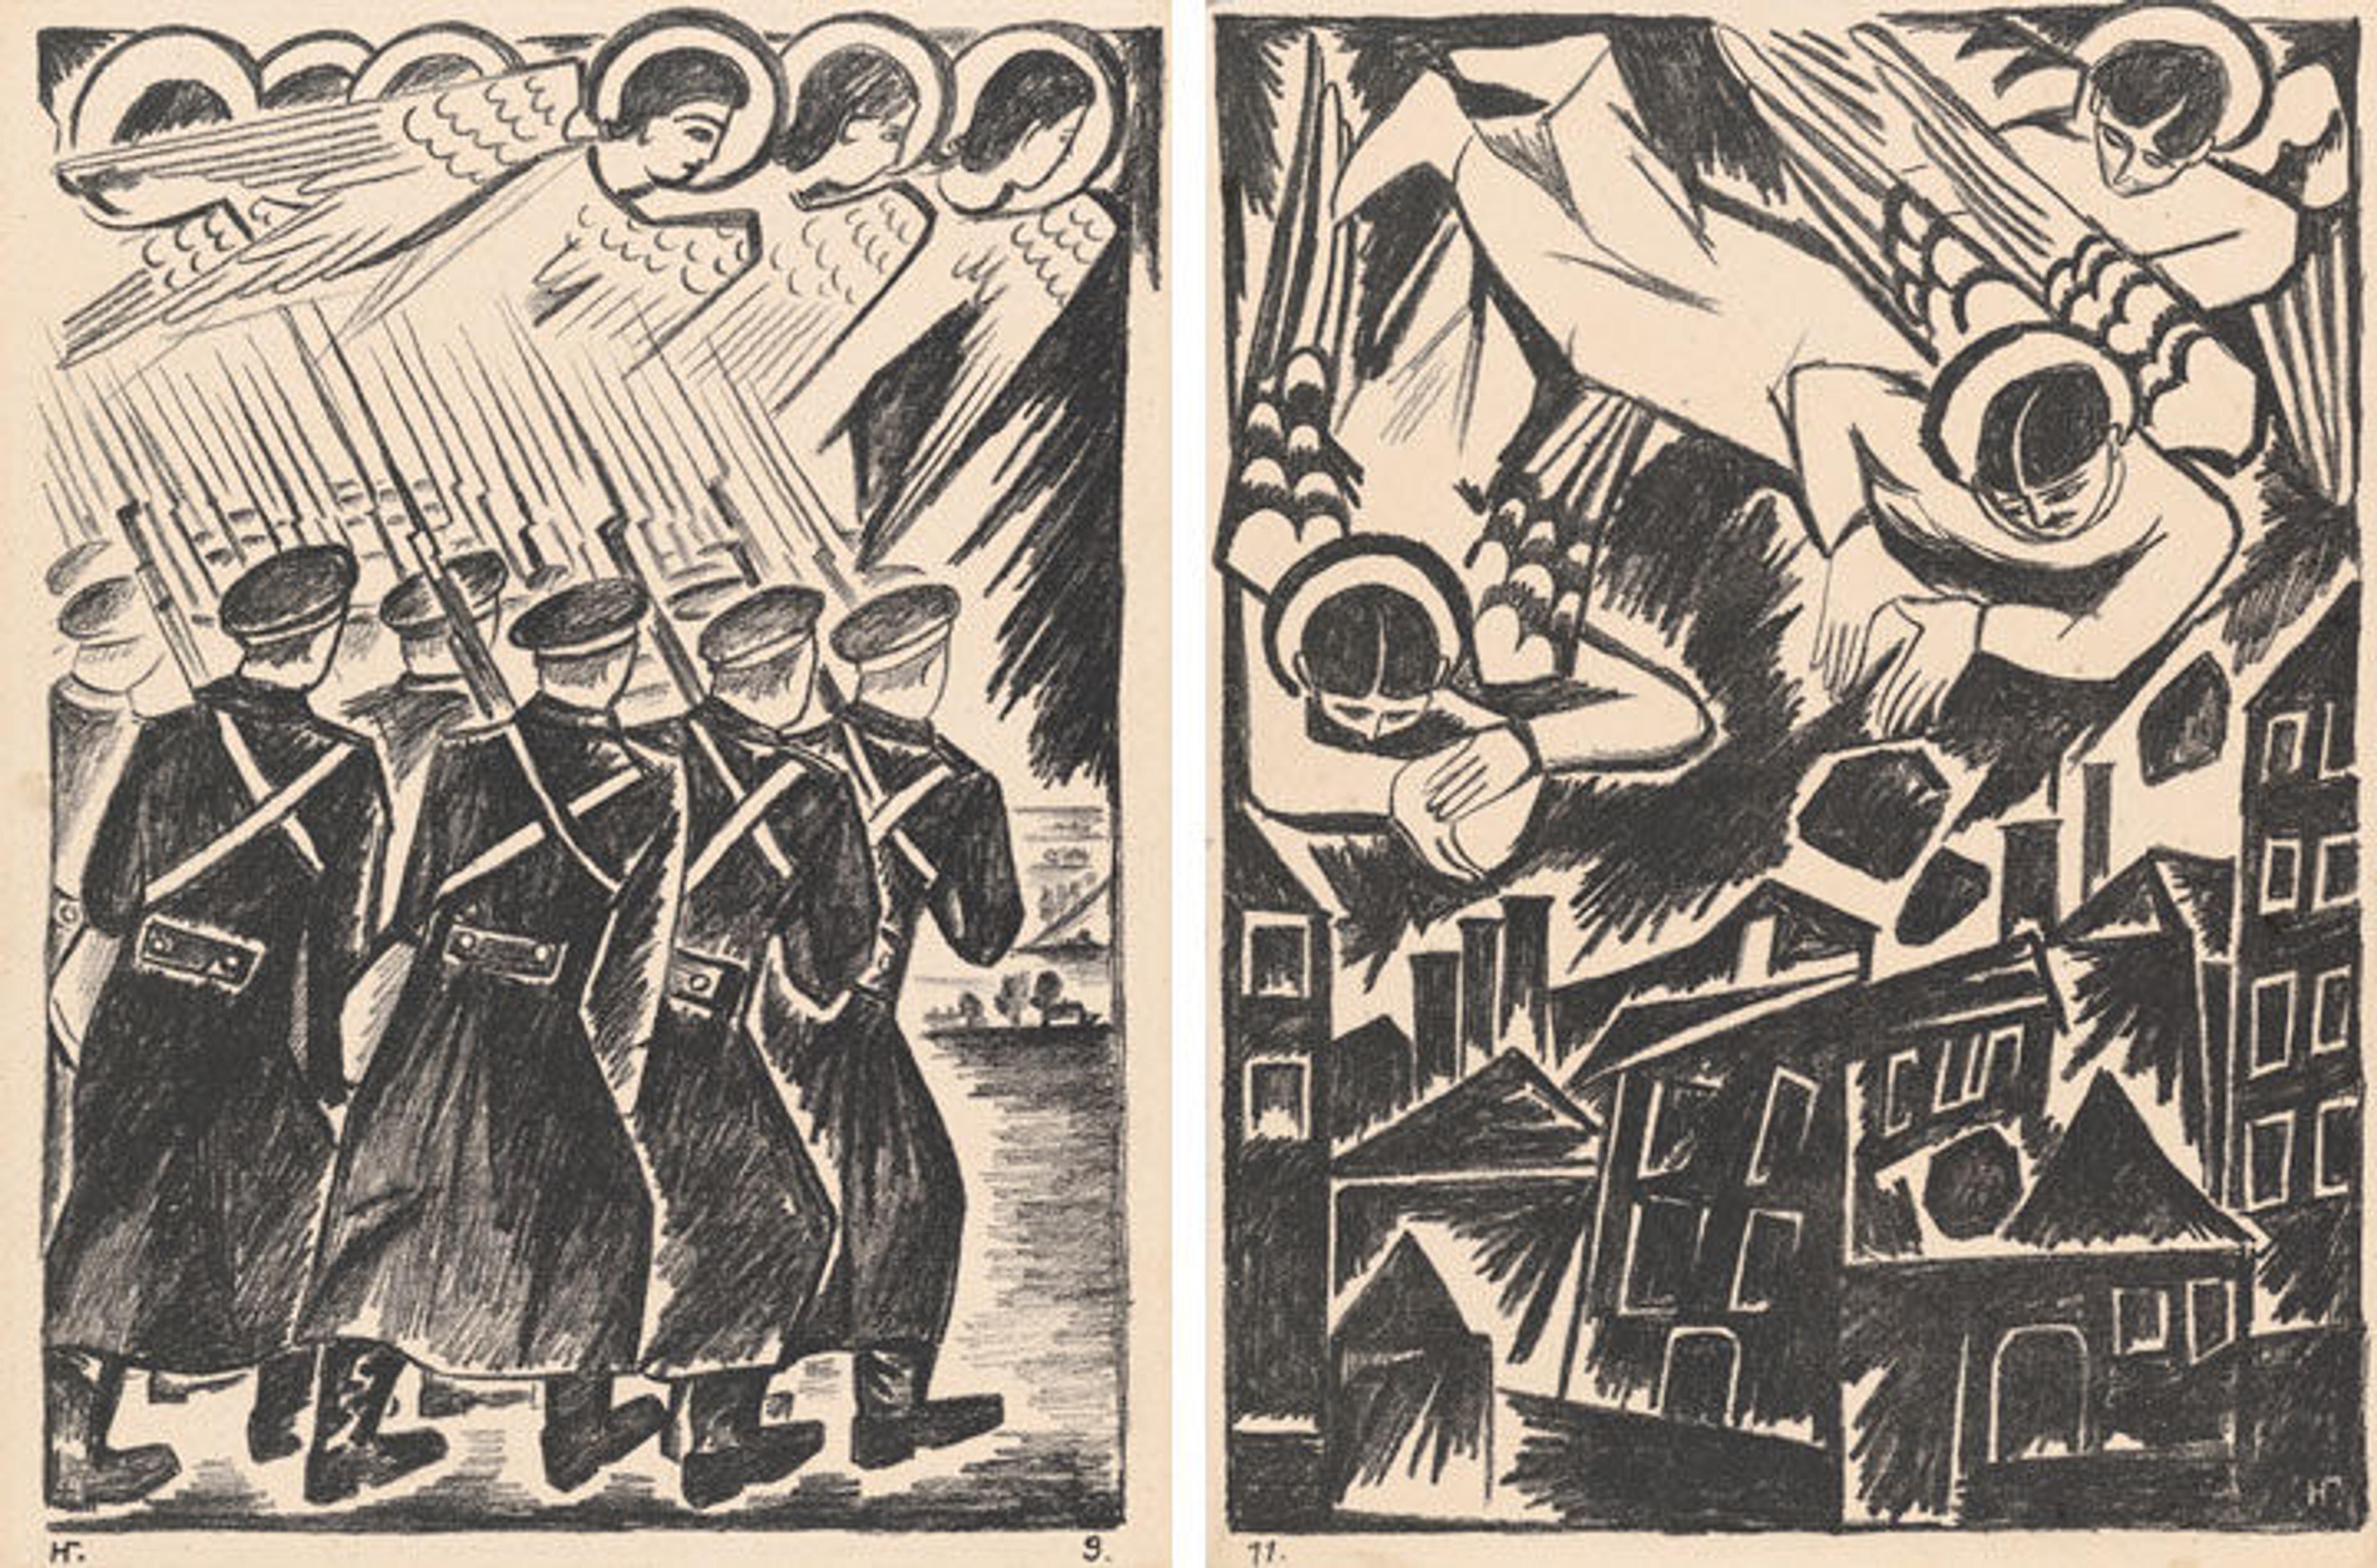 Two works by Natalia Goncharova. On the left, 'Christian Host,' showing a troop of soldiers being led by angels in the sky; on the right, 'Doomed City,' showing a group of angels hurling boulders on a city